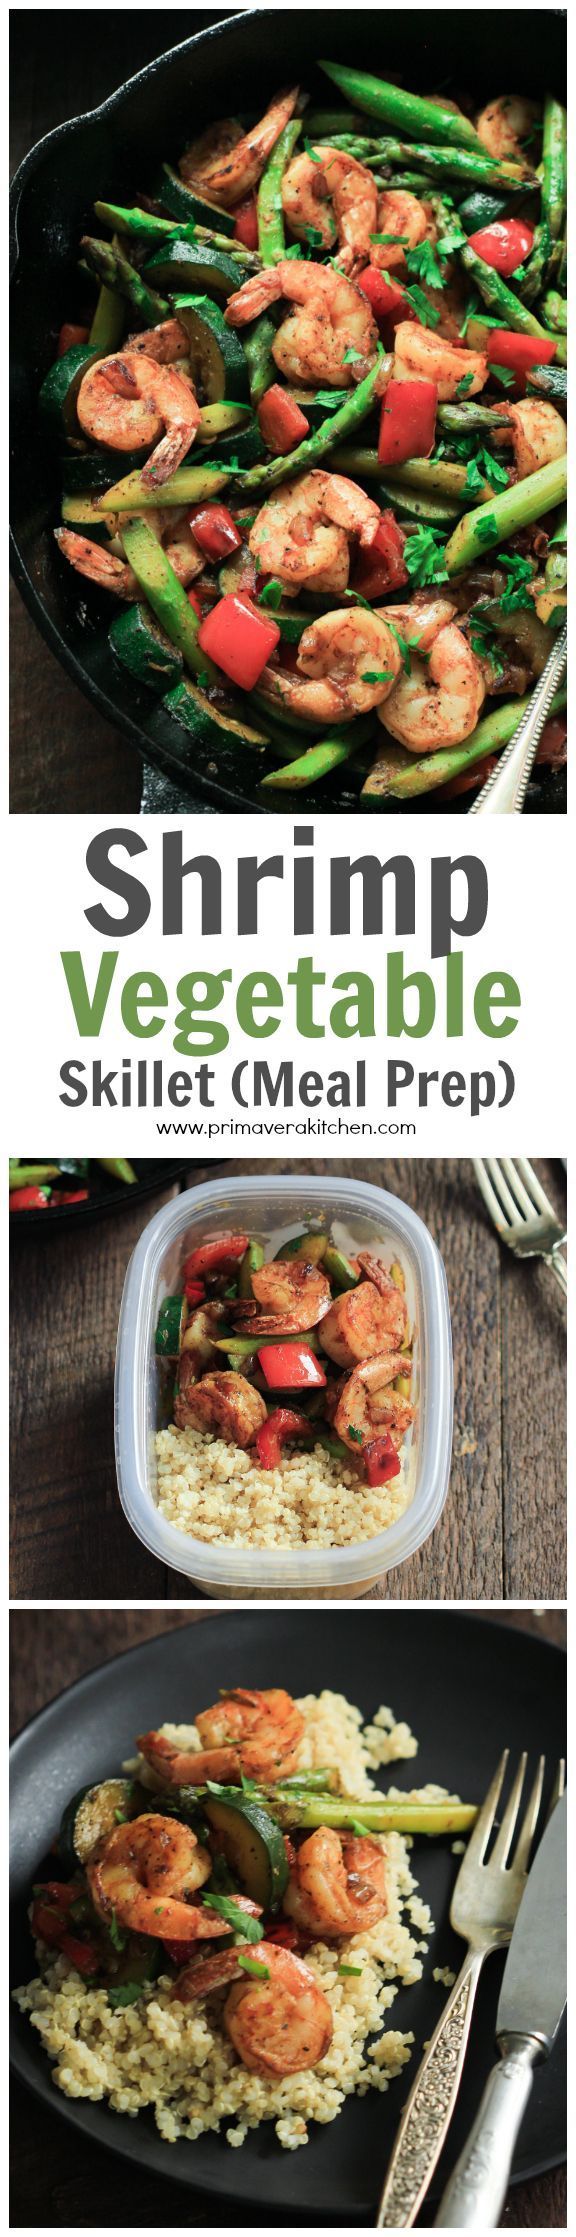 This ultra-easy Shrimp Vegetable Skillet recipe is loaded with veggies, flavorful spices and shrimp. It’s a low-carb,